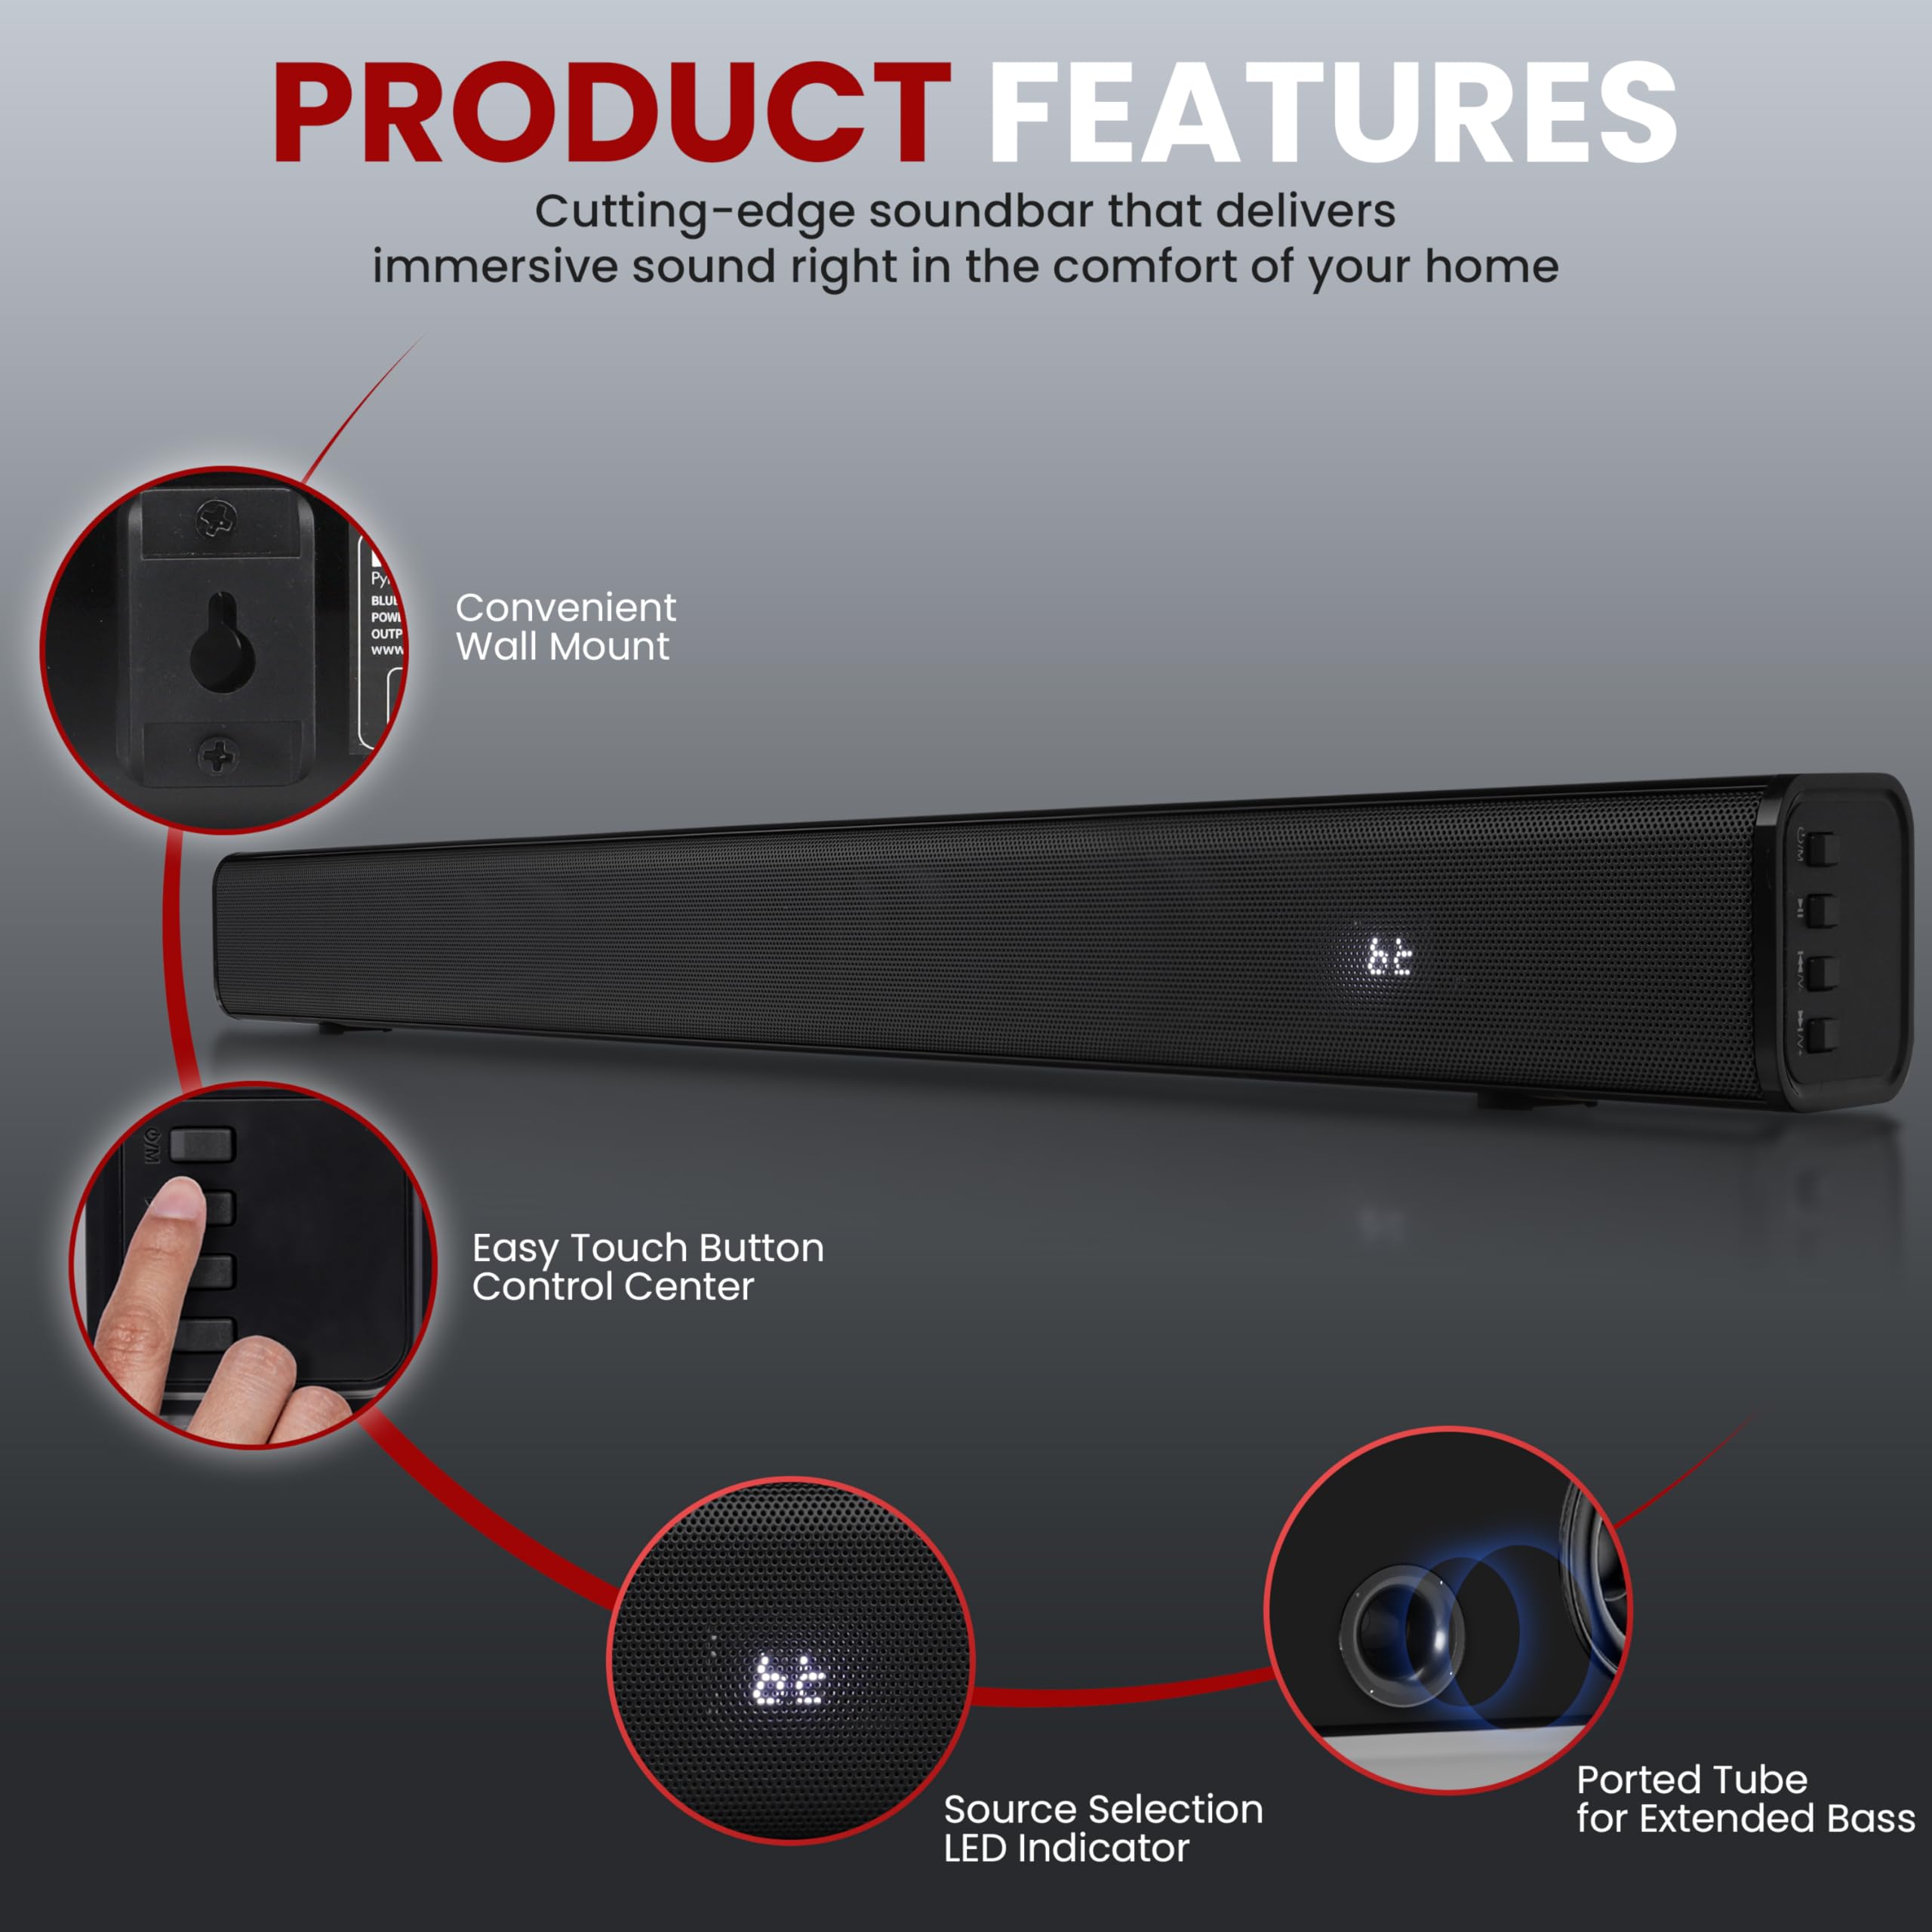 Pyle Home Theater Soundbar Speaker - Wave Base Streaming Tabletop Stand Mount TV Digital System with AUX/Digital Optical Audio Connector Jacks/USB Port, HDMI /ARC, Full Sound Reproduction